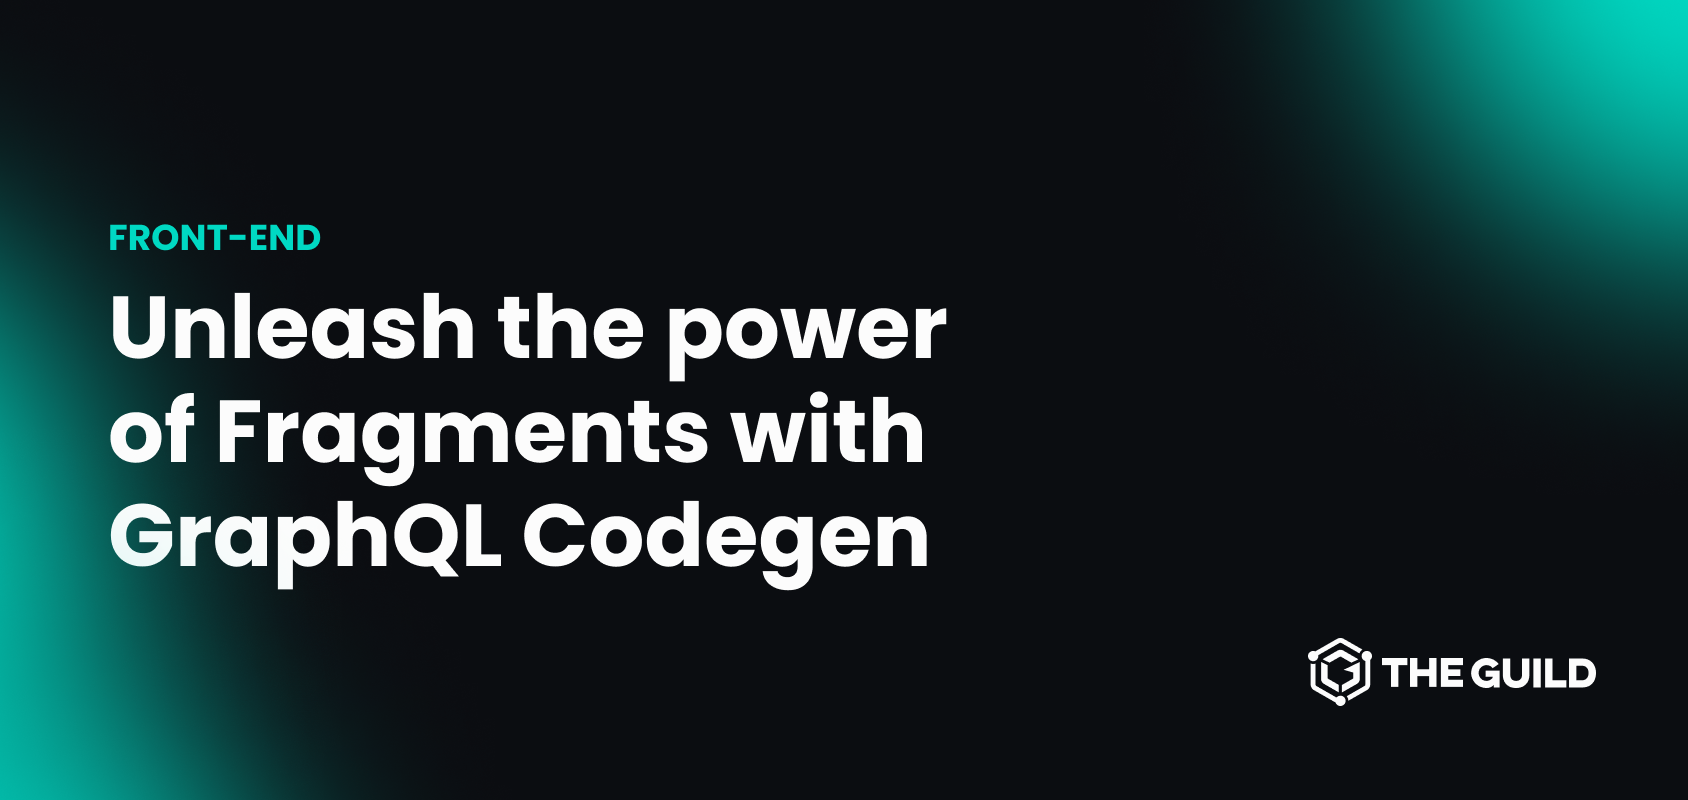 Unleash the power of Fragments with GraphQL Codegen - The Guild Blog